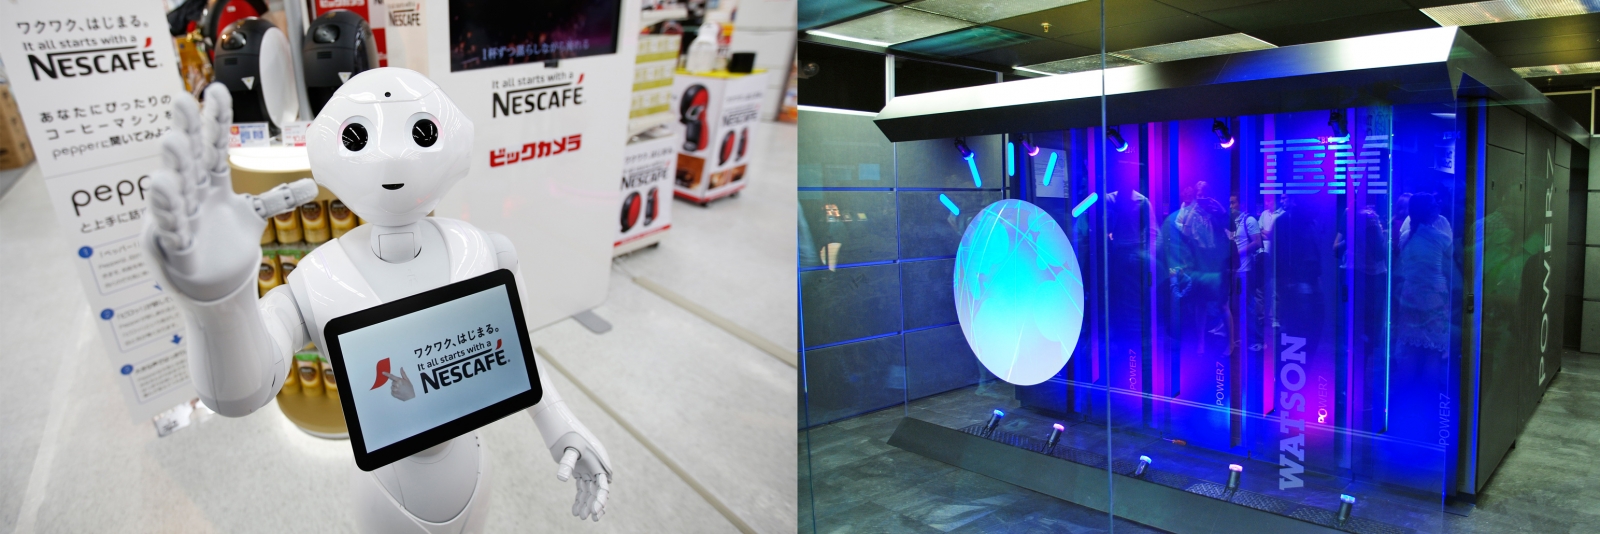 Imagine how powerful a robot Pepper could be if it had a brain like IBM's Watson?